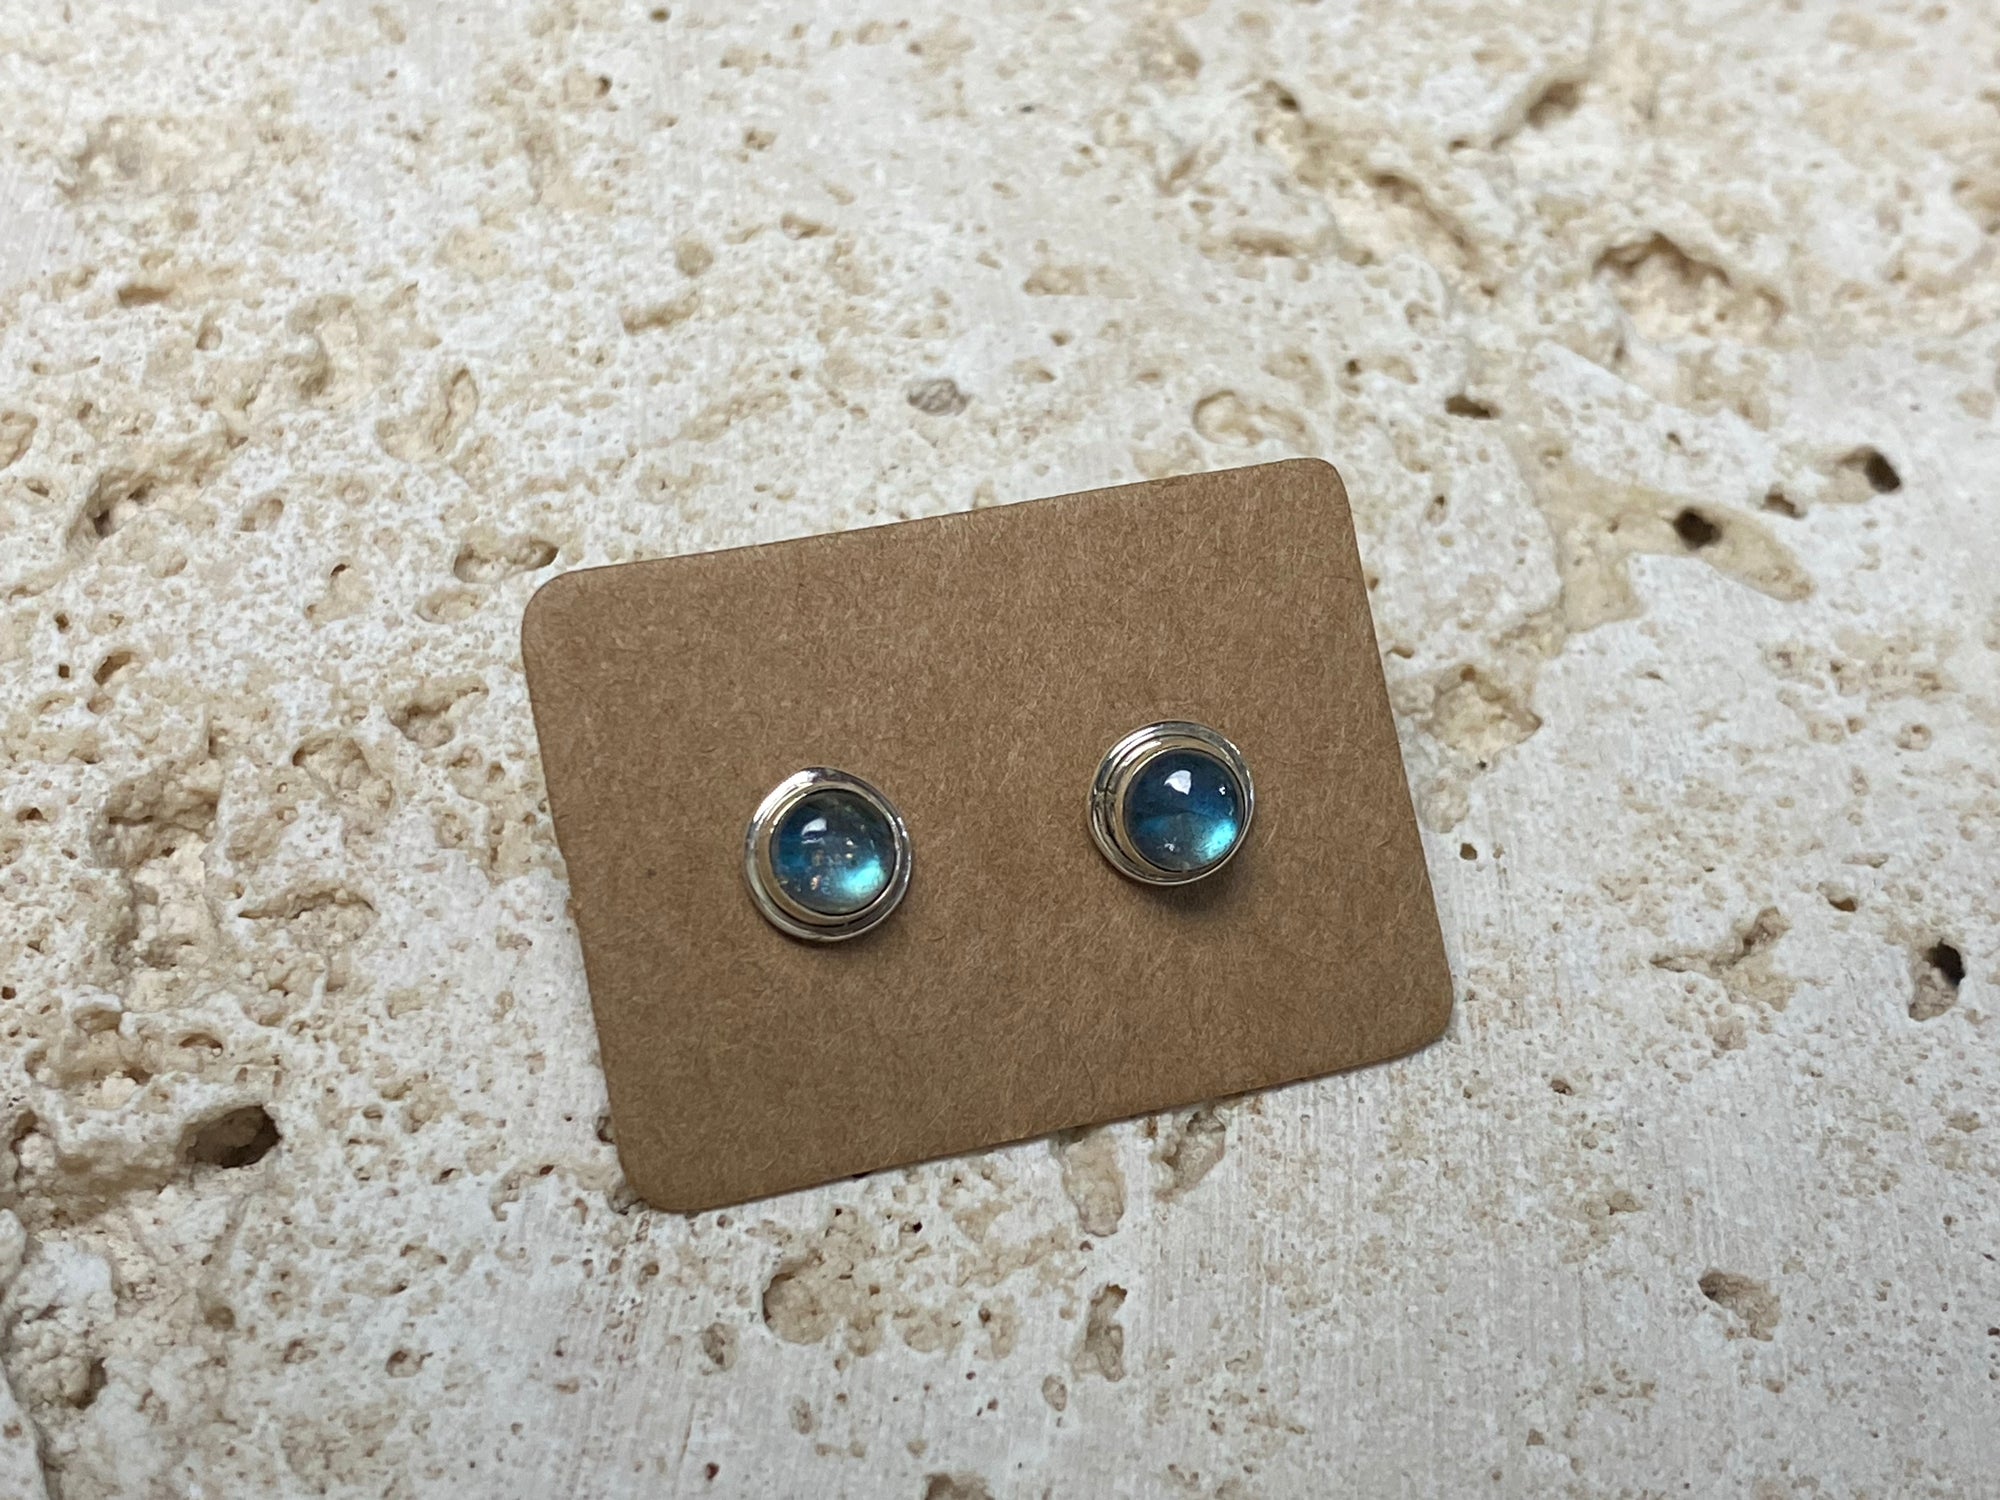 These small labradorite studs are hand made from sterling silver and set with natural labradorite cabochon stones